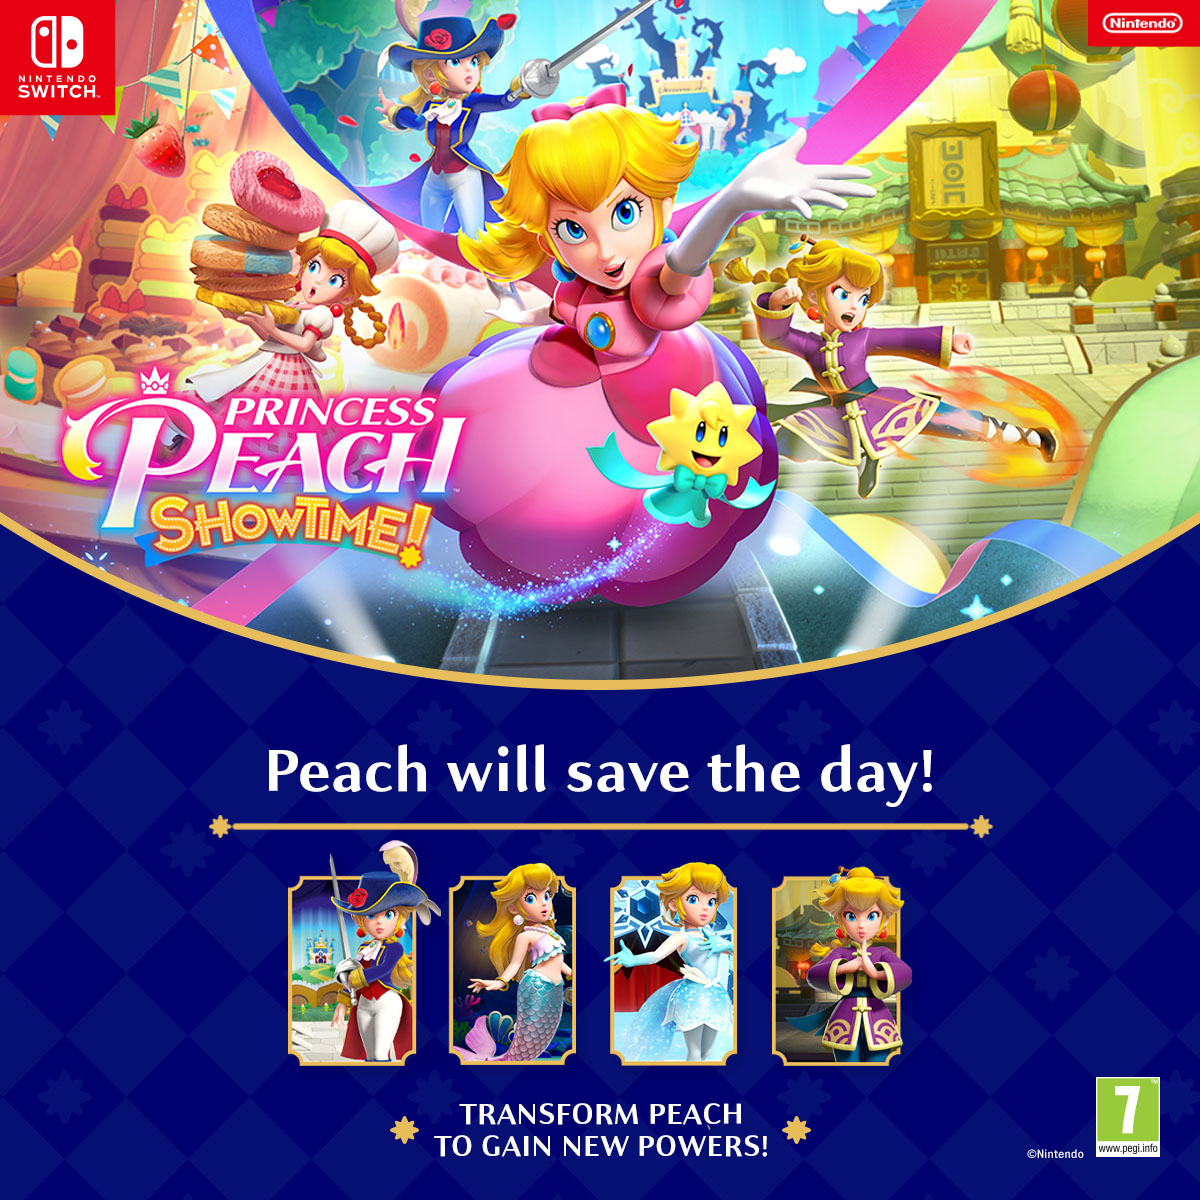 Princess Peach takes the spotlight! 🩷 Princess Peach Showtime is OUT NOW on Nintendo Switch! 🎮 Shop now at Smyths Toys 👉 tinyurl.com/bdet5x9x